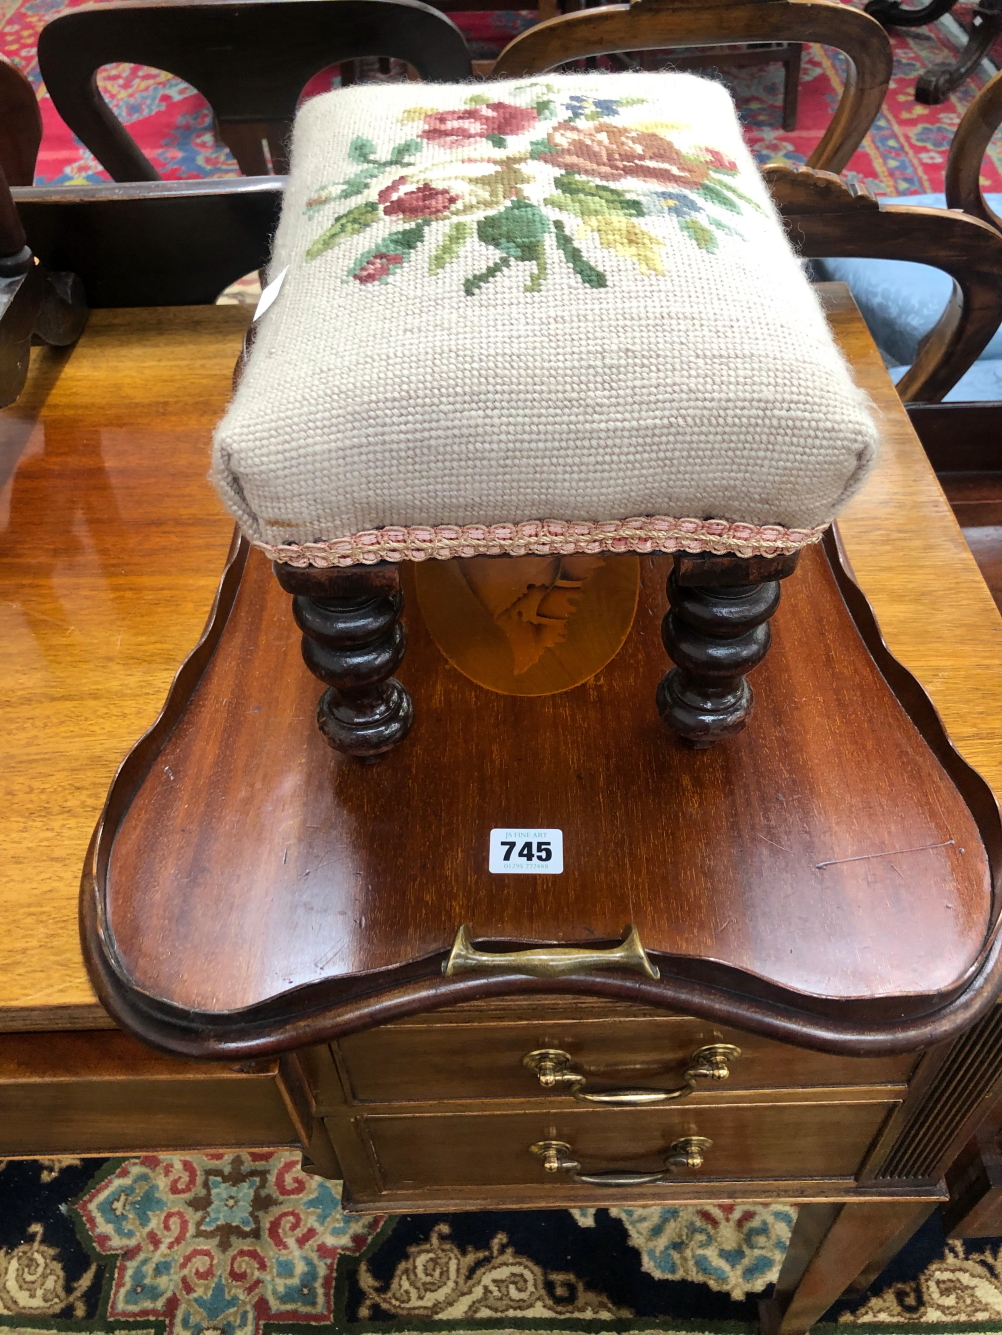 A FOOTSTOOL WITH A NEEDLE WORK SEAT TOGETHER WITH A TWO HANDLED MAHOGANY TRAY